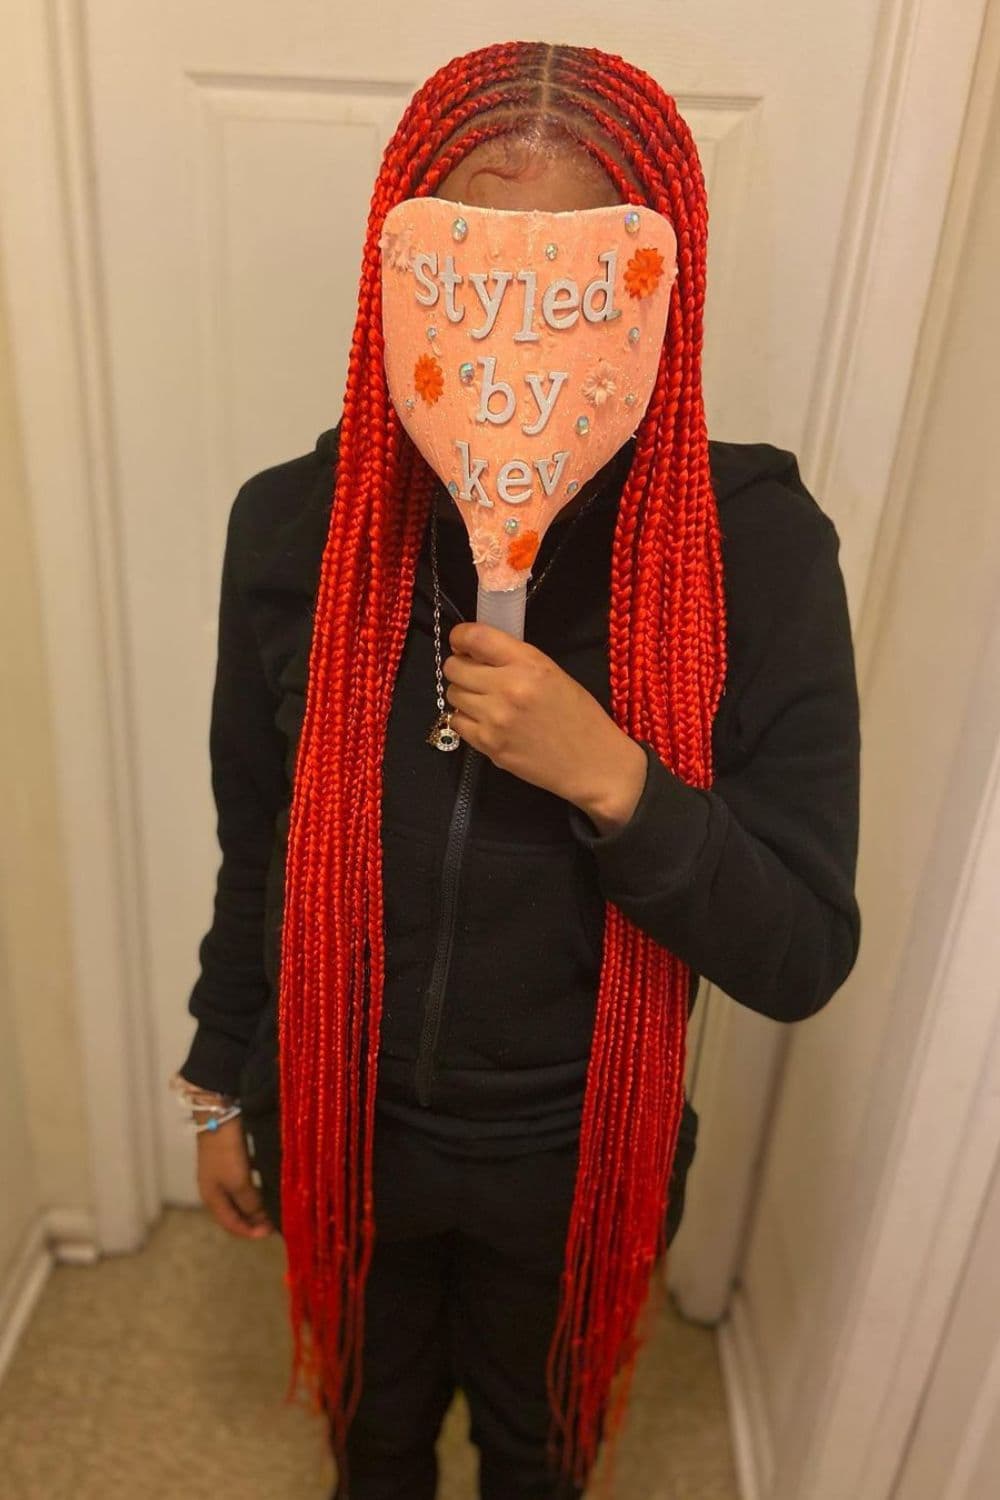 A woman standing covering her face with red middle-parted tribal braids.